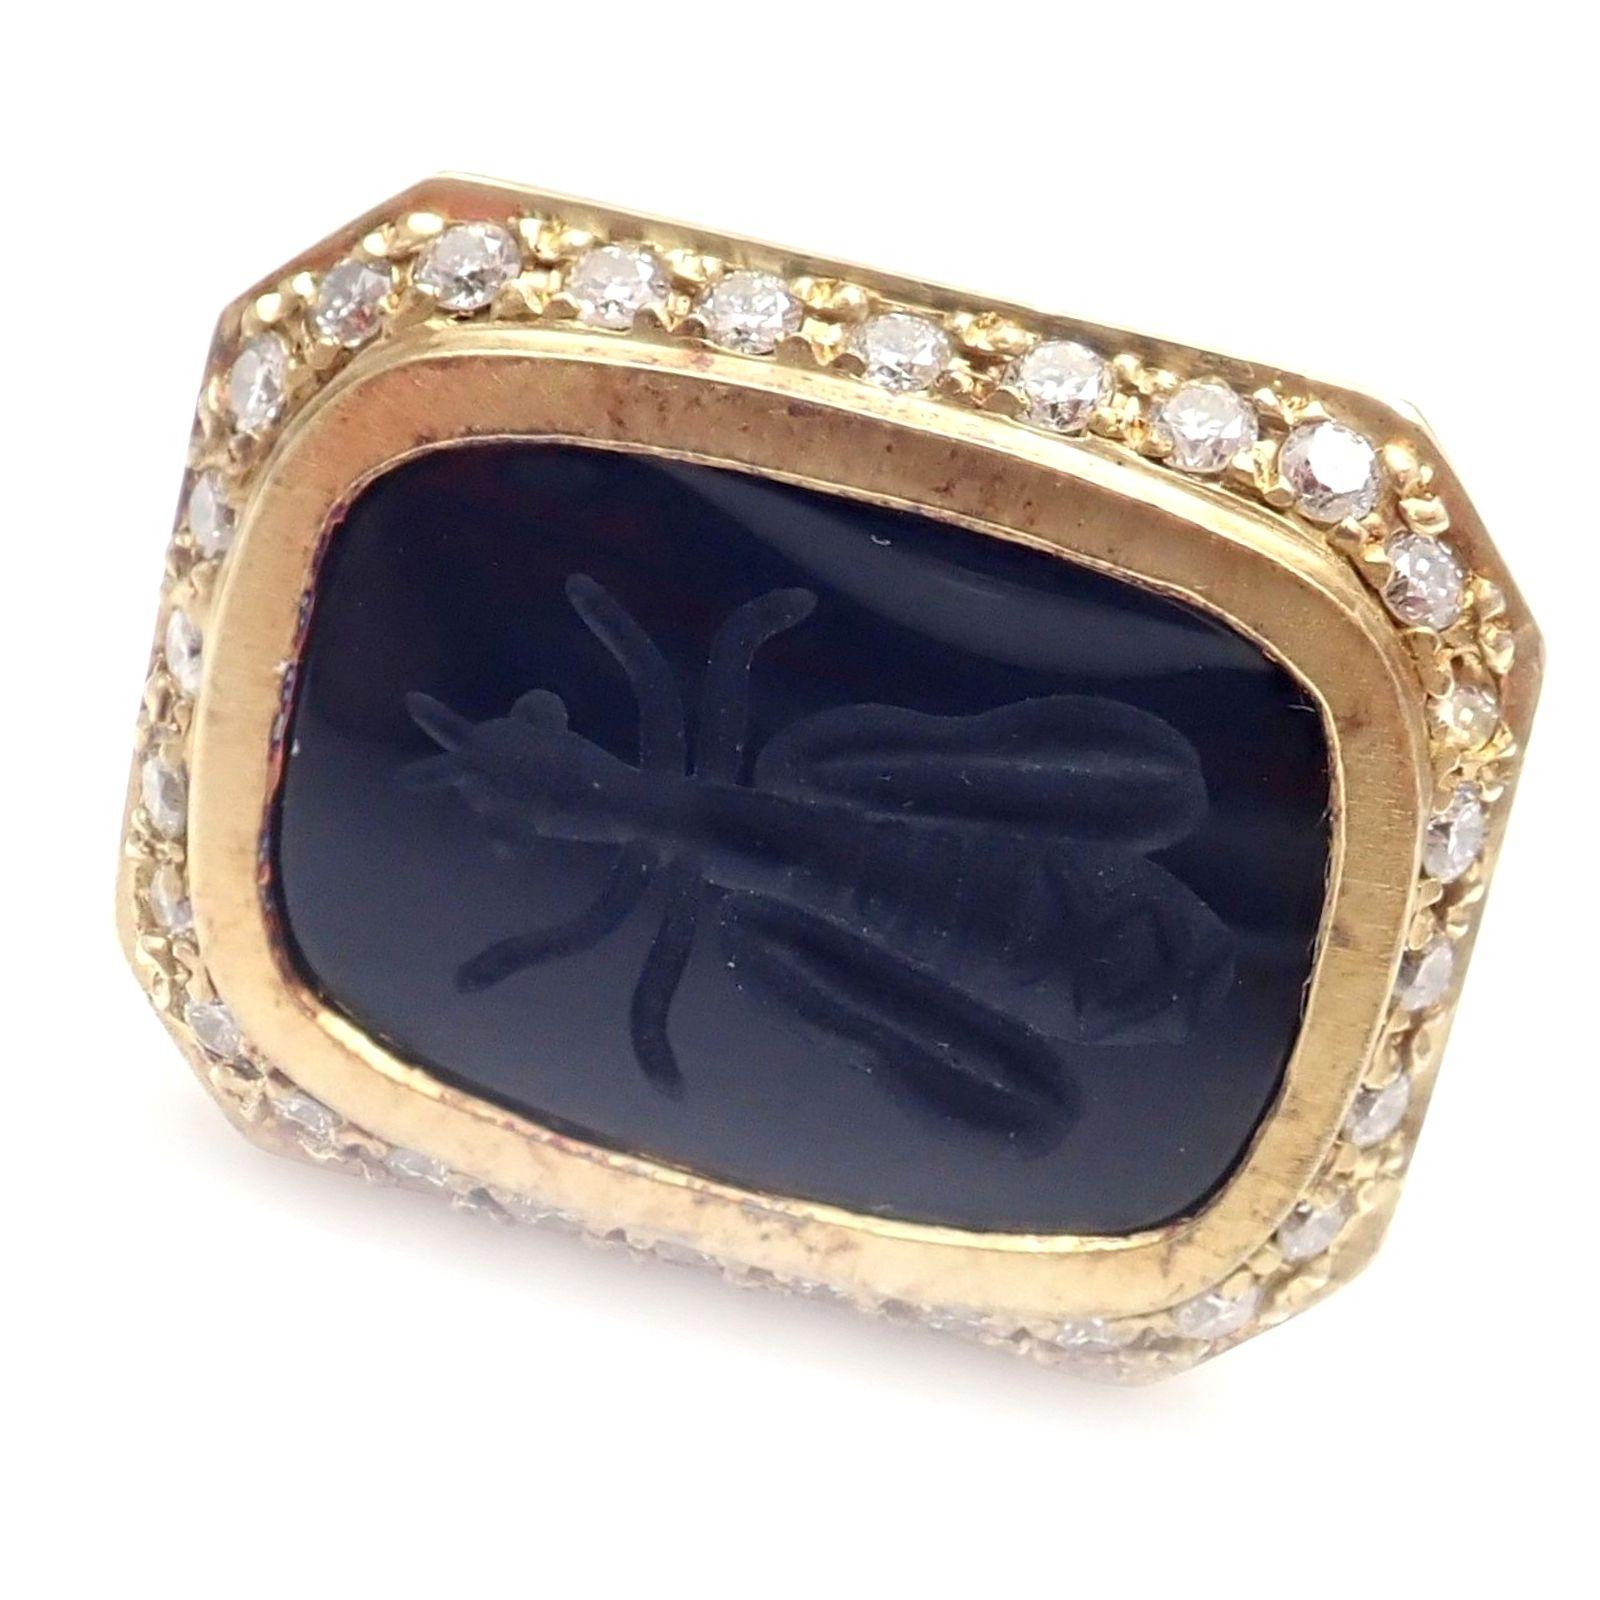 18k Yellow Gold Diamond Black Agate Intaglio Bug Ring by Seiden Gang. 
With 29x Diamonds VVS/G Color 0.58ctw
1x Black Agate
Details: 
Size: 7
Weight: 26.1 grams
Width: 18mm x 23mm
Stamped Hallmarks: SG 18k
*Free Shipping within the United